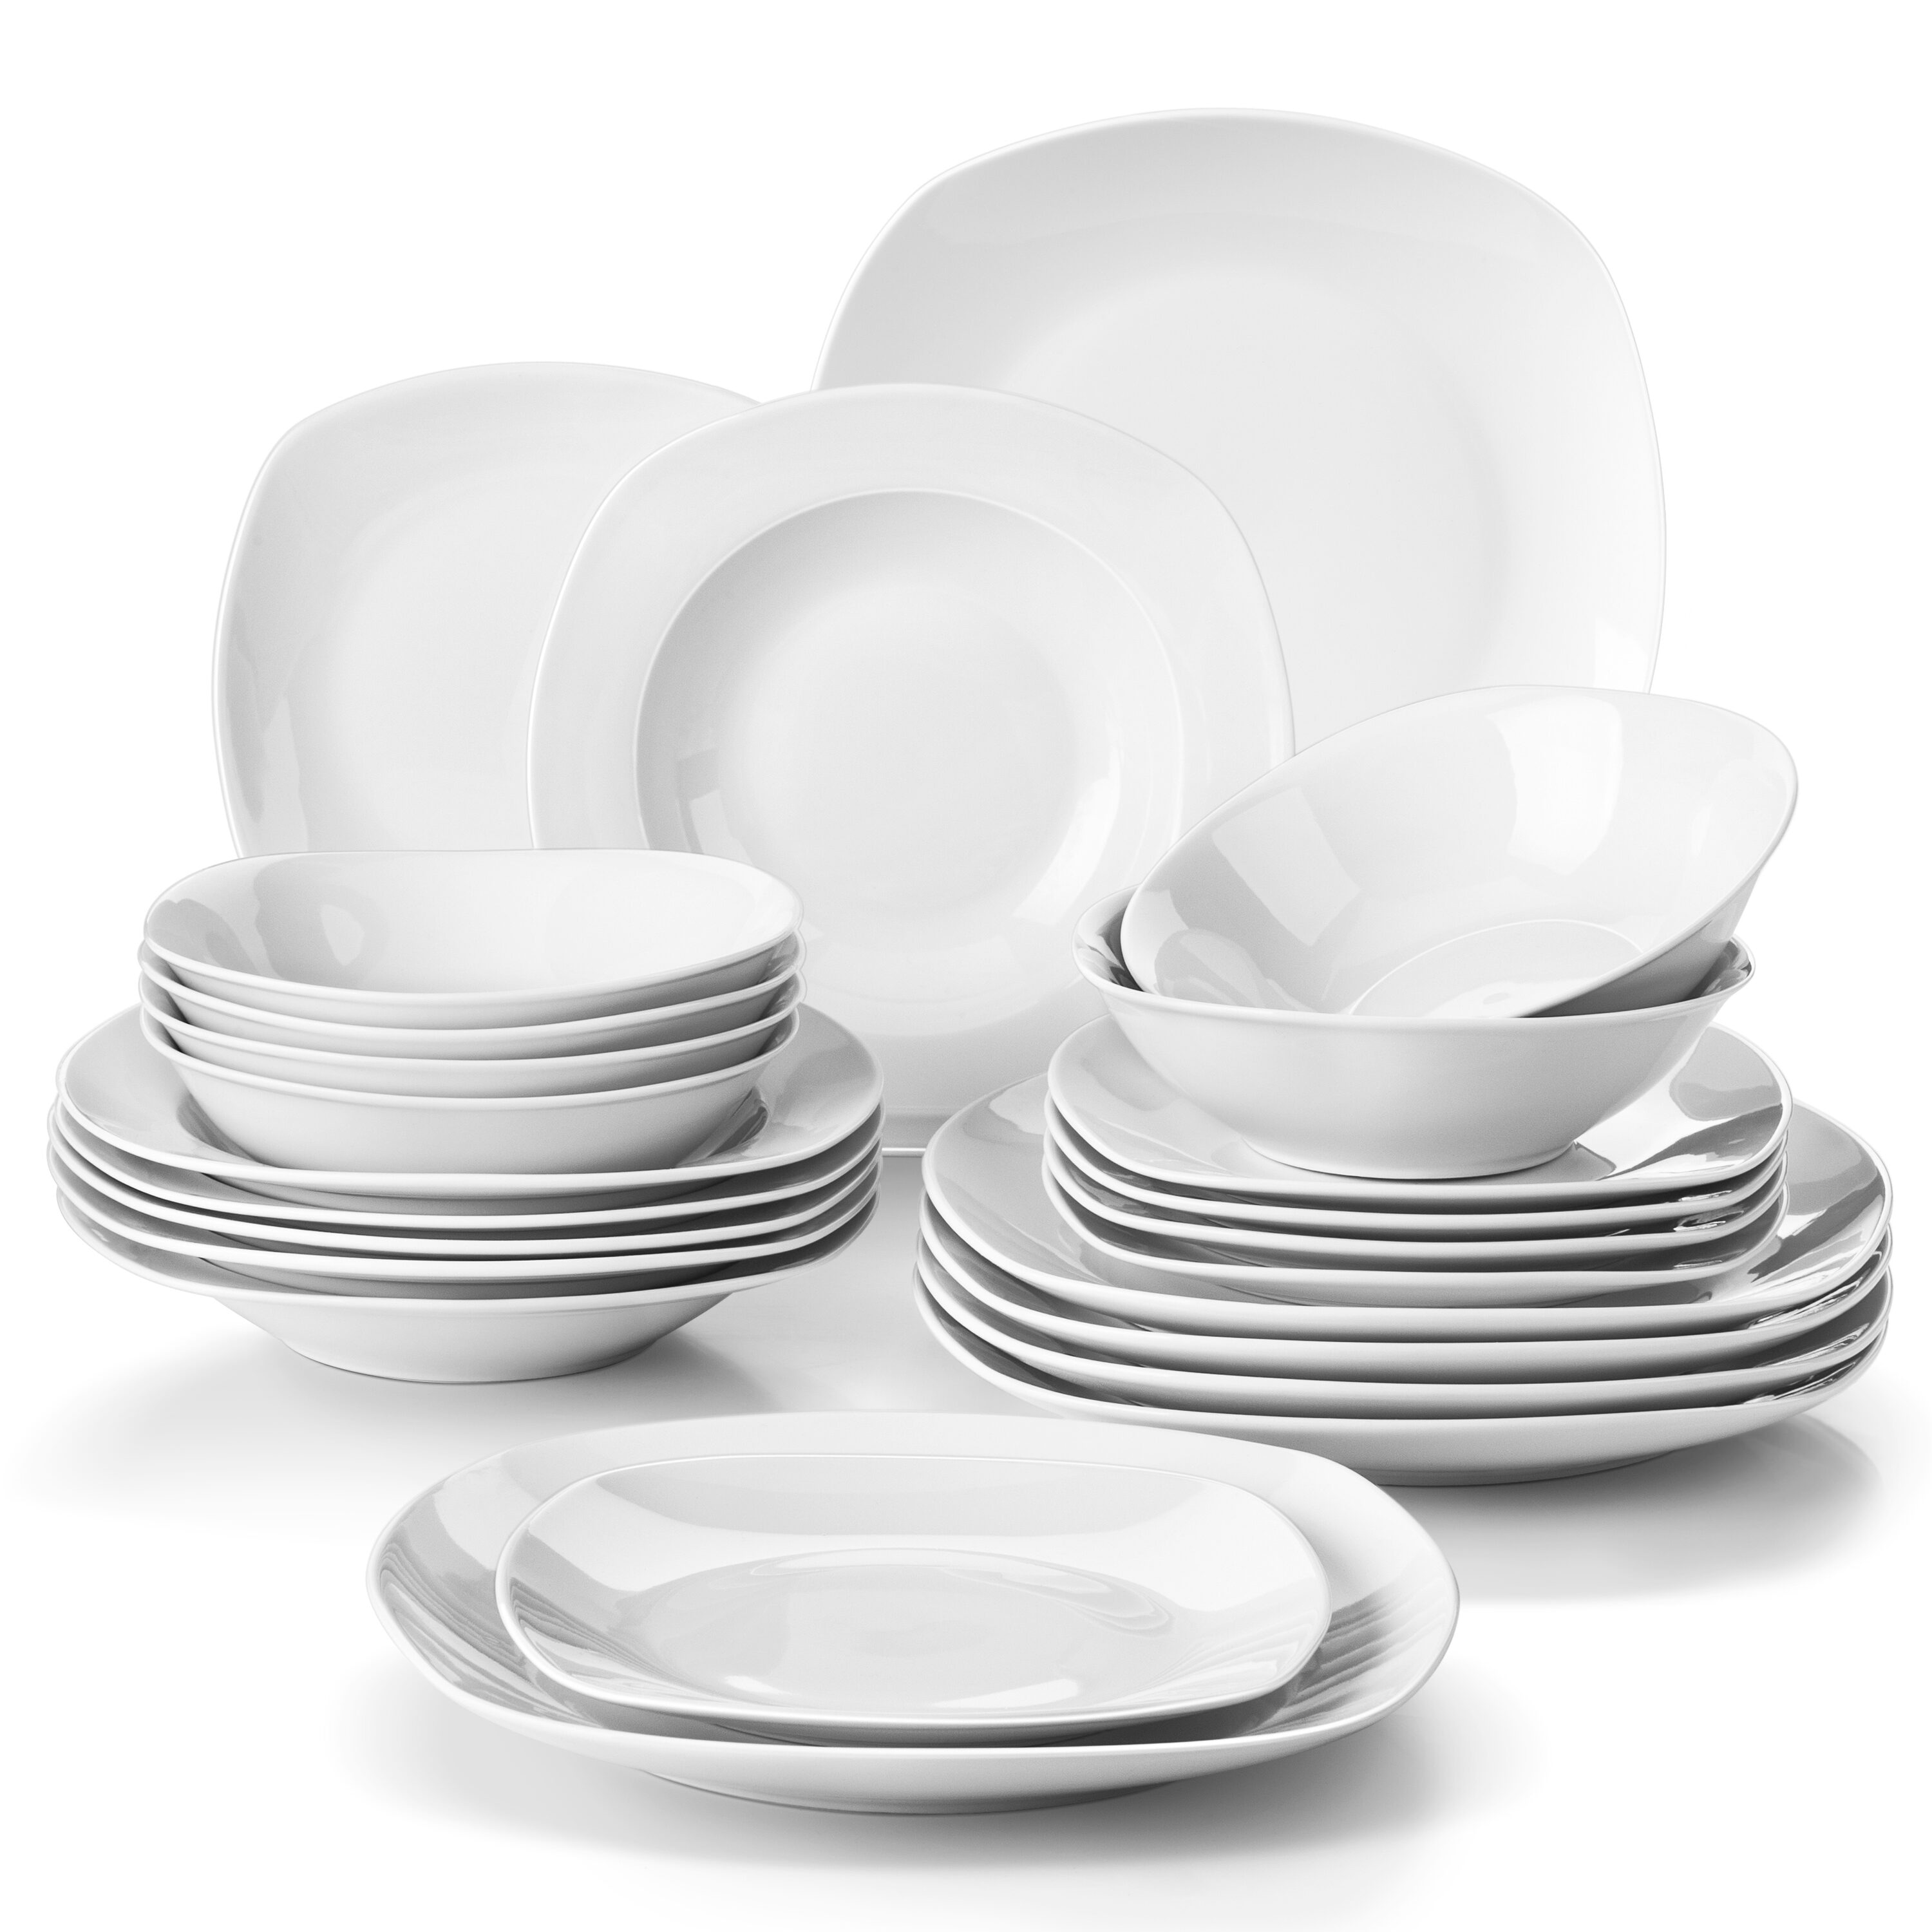 MALACASA Plates and Bowls Sets, 26 Piece Ivory White Square Dinnerware Sets  for 6, Porcelain Dinnerware Set with Dinner Plate Set, Cereal Bowls and